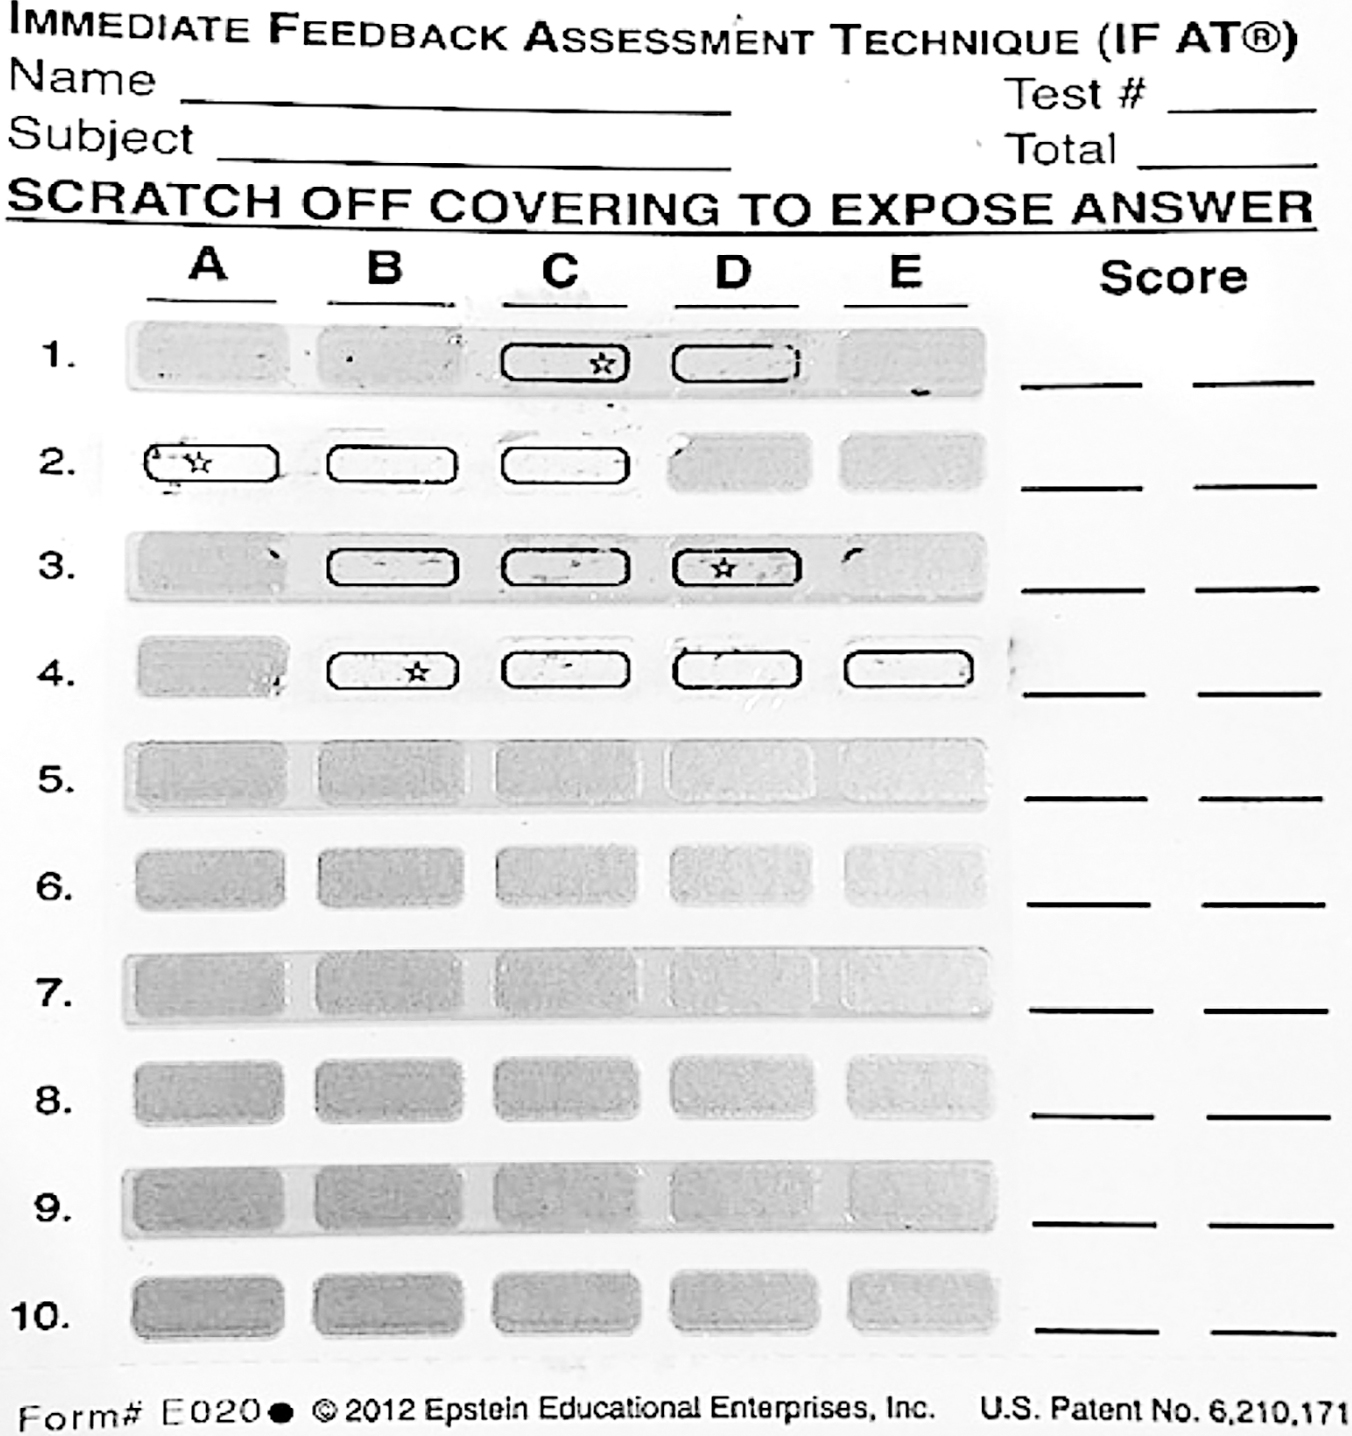 Immediate Feedback Assessment Technique (IF-AT) scratch card. Correct answer is indicated by star. Students work in teams to scratch answer choices until they receive a correct answer. Each question is worth a total of 10 points. For every incorrect scrat